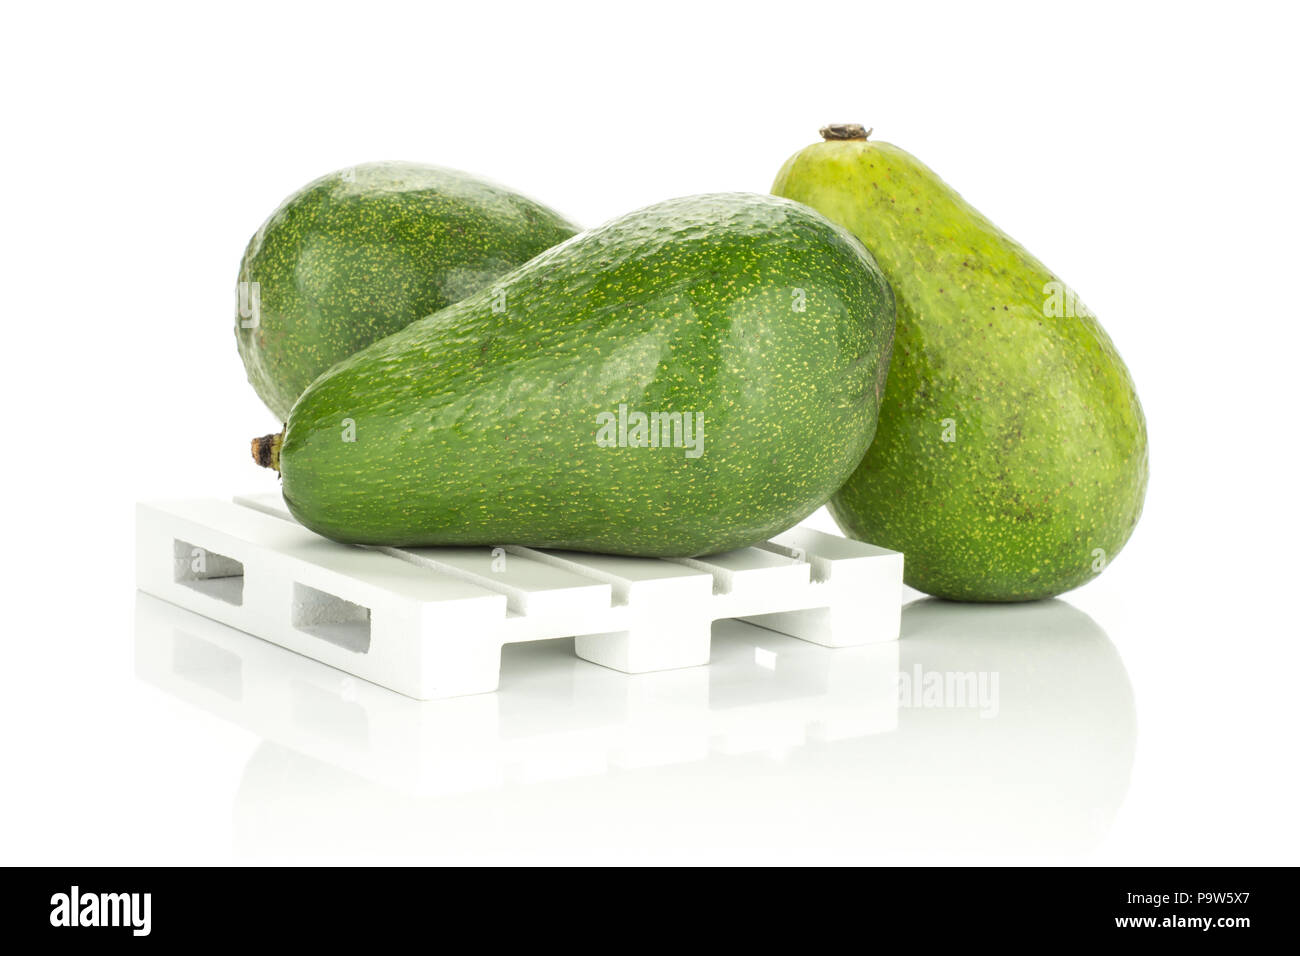 Three green smooth avocado on a wooden pallet isolated on white background ripe shiny bacon variety Stock Photo